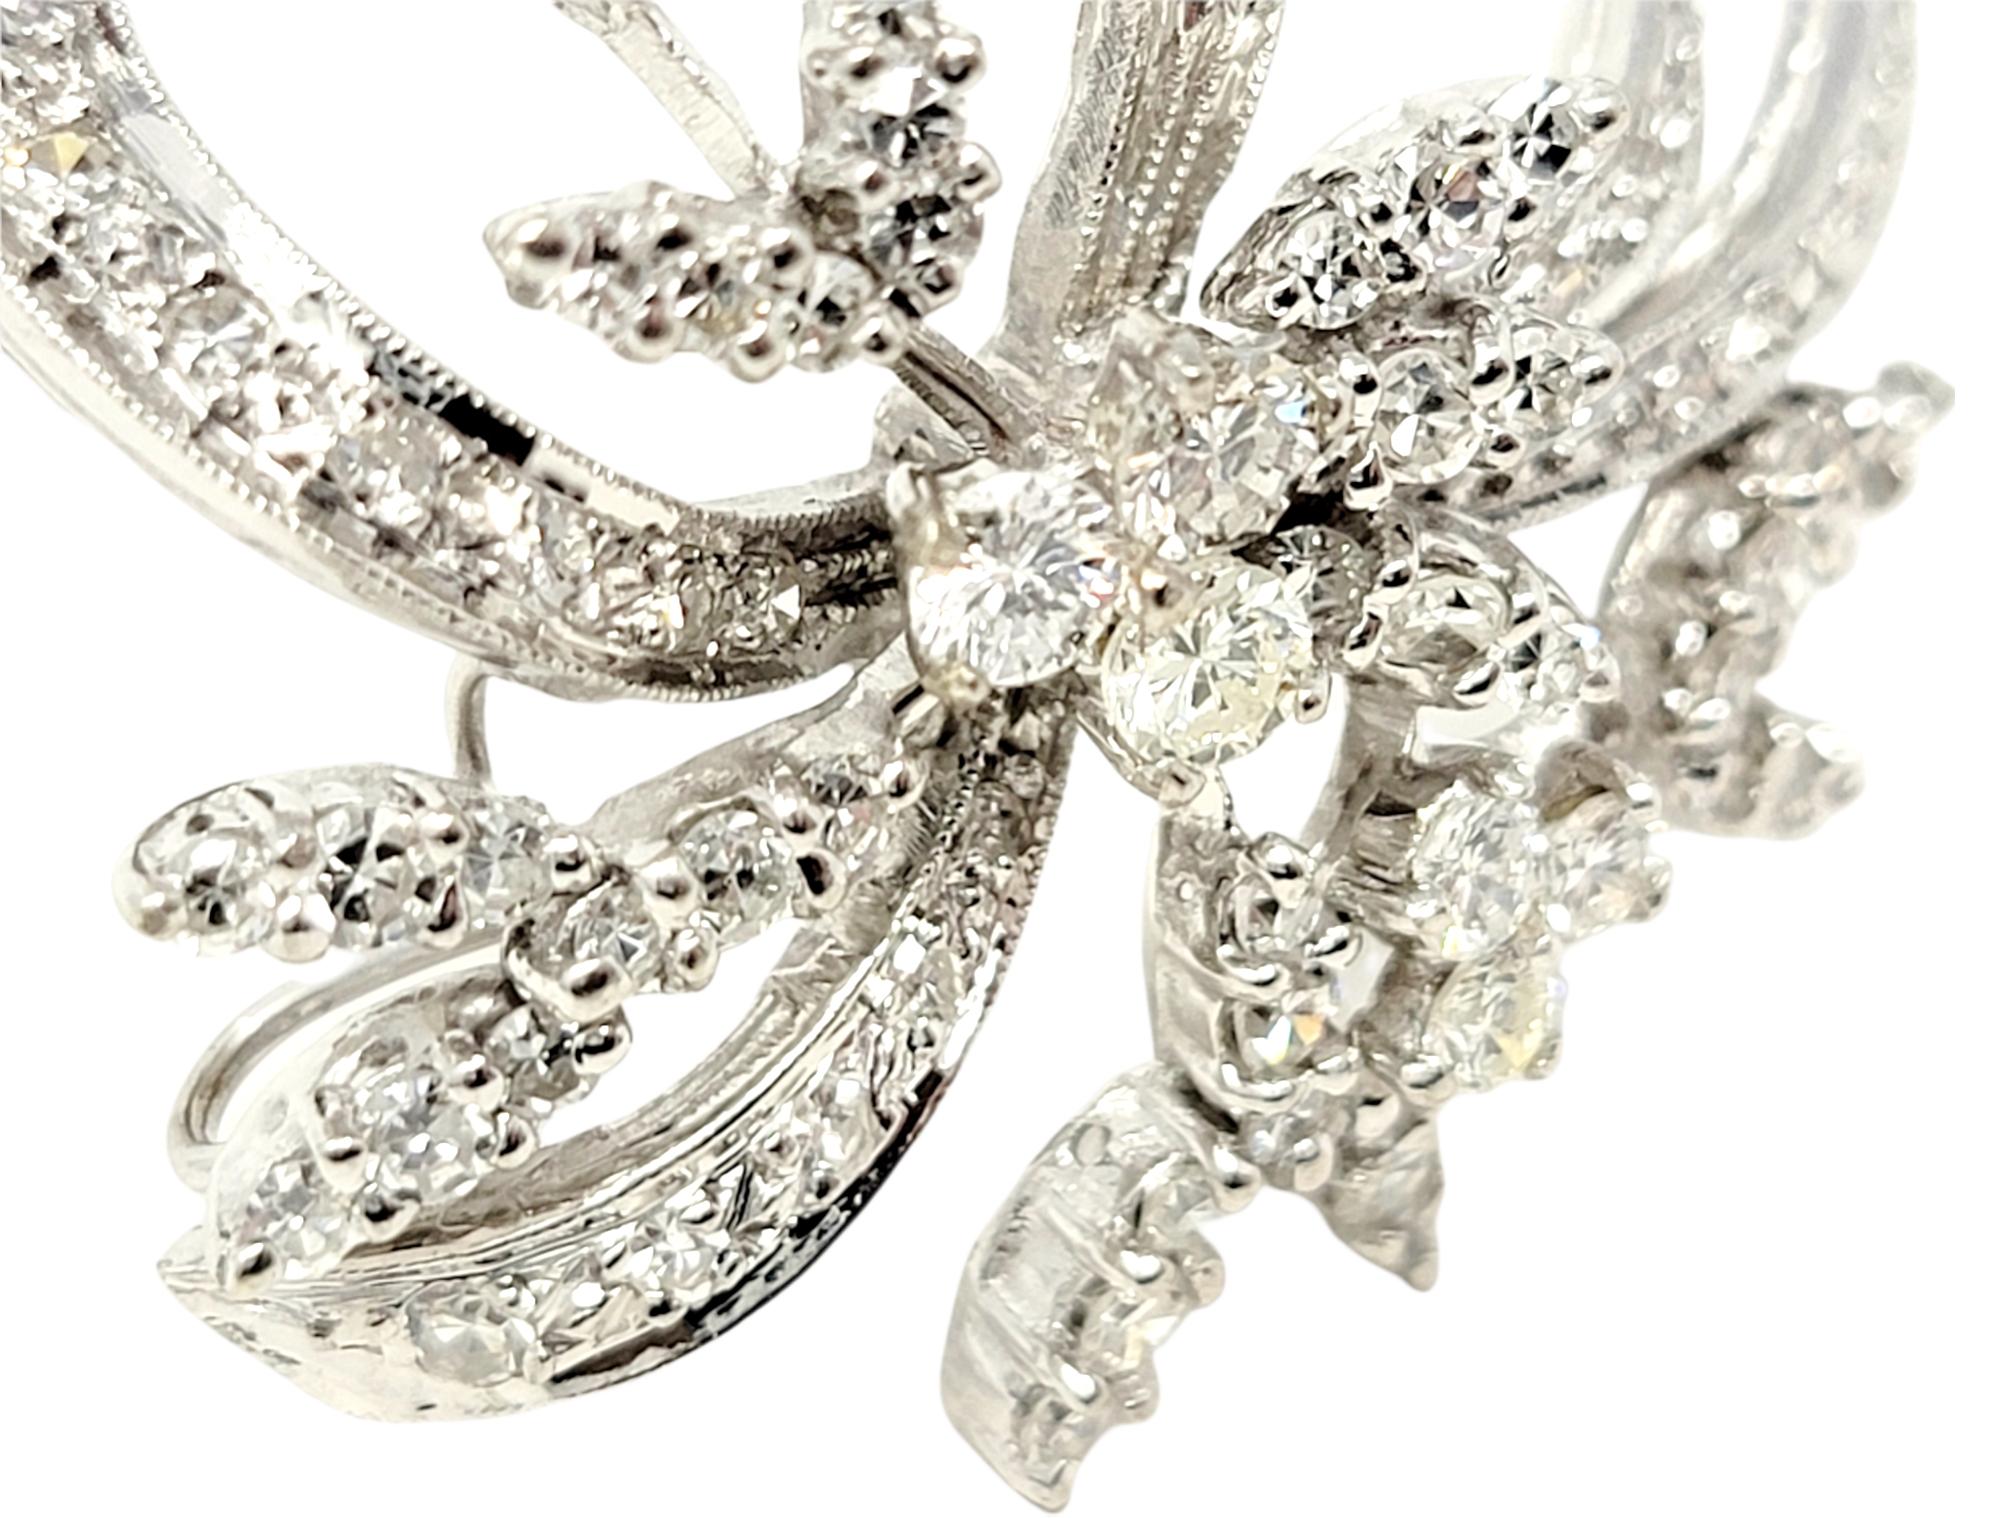 Elegant vintage style brooch bursting with sparkle. This gorgeous brooch is made of 14 karat white gold and arranged in a horizontal layout. It features 78 icy white natural round brilliant and single cut diamonds set in a sophisticated swirling